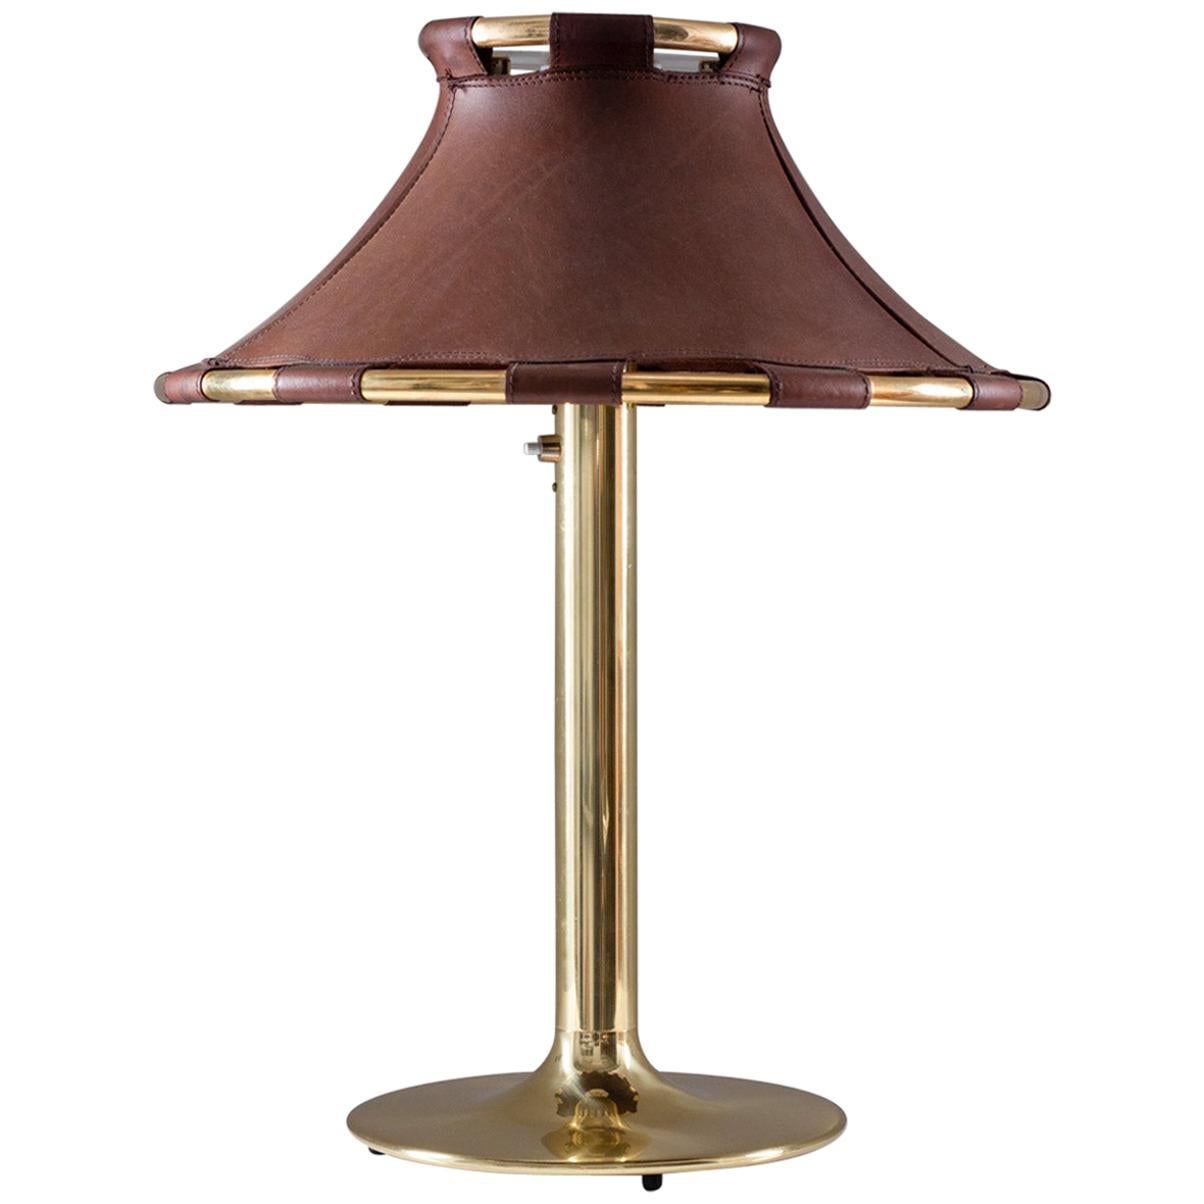 Table Lamp in Brass and Leather Model "Anna" by Anna Ehrner for Ateljé Lyktan